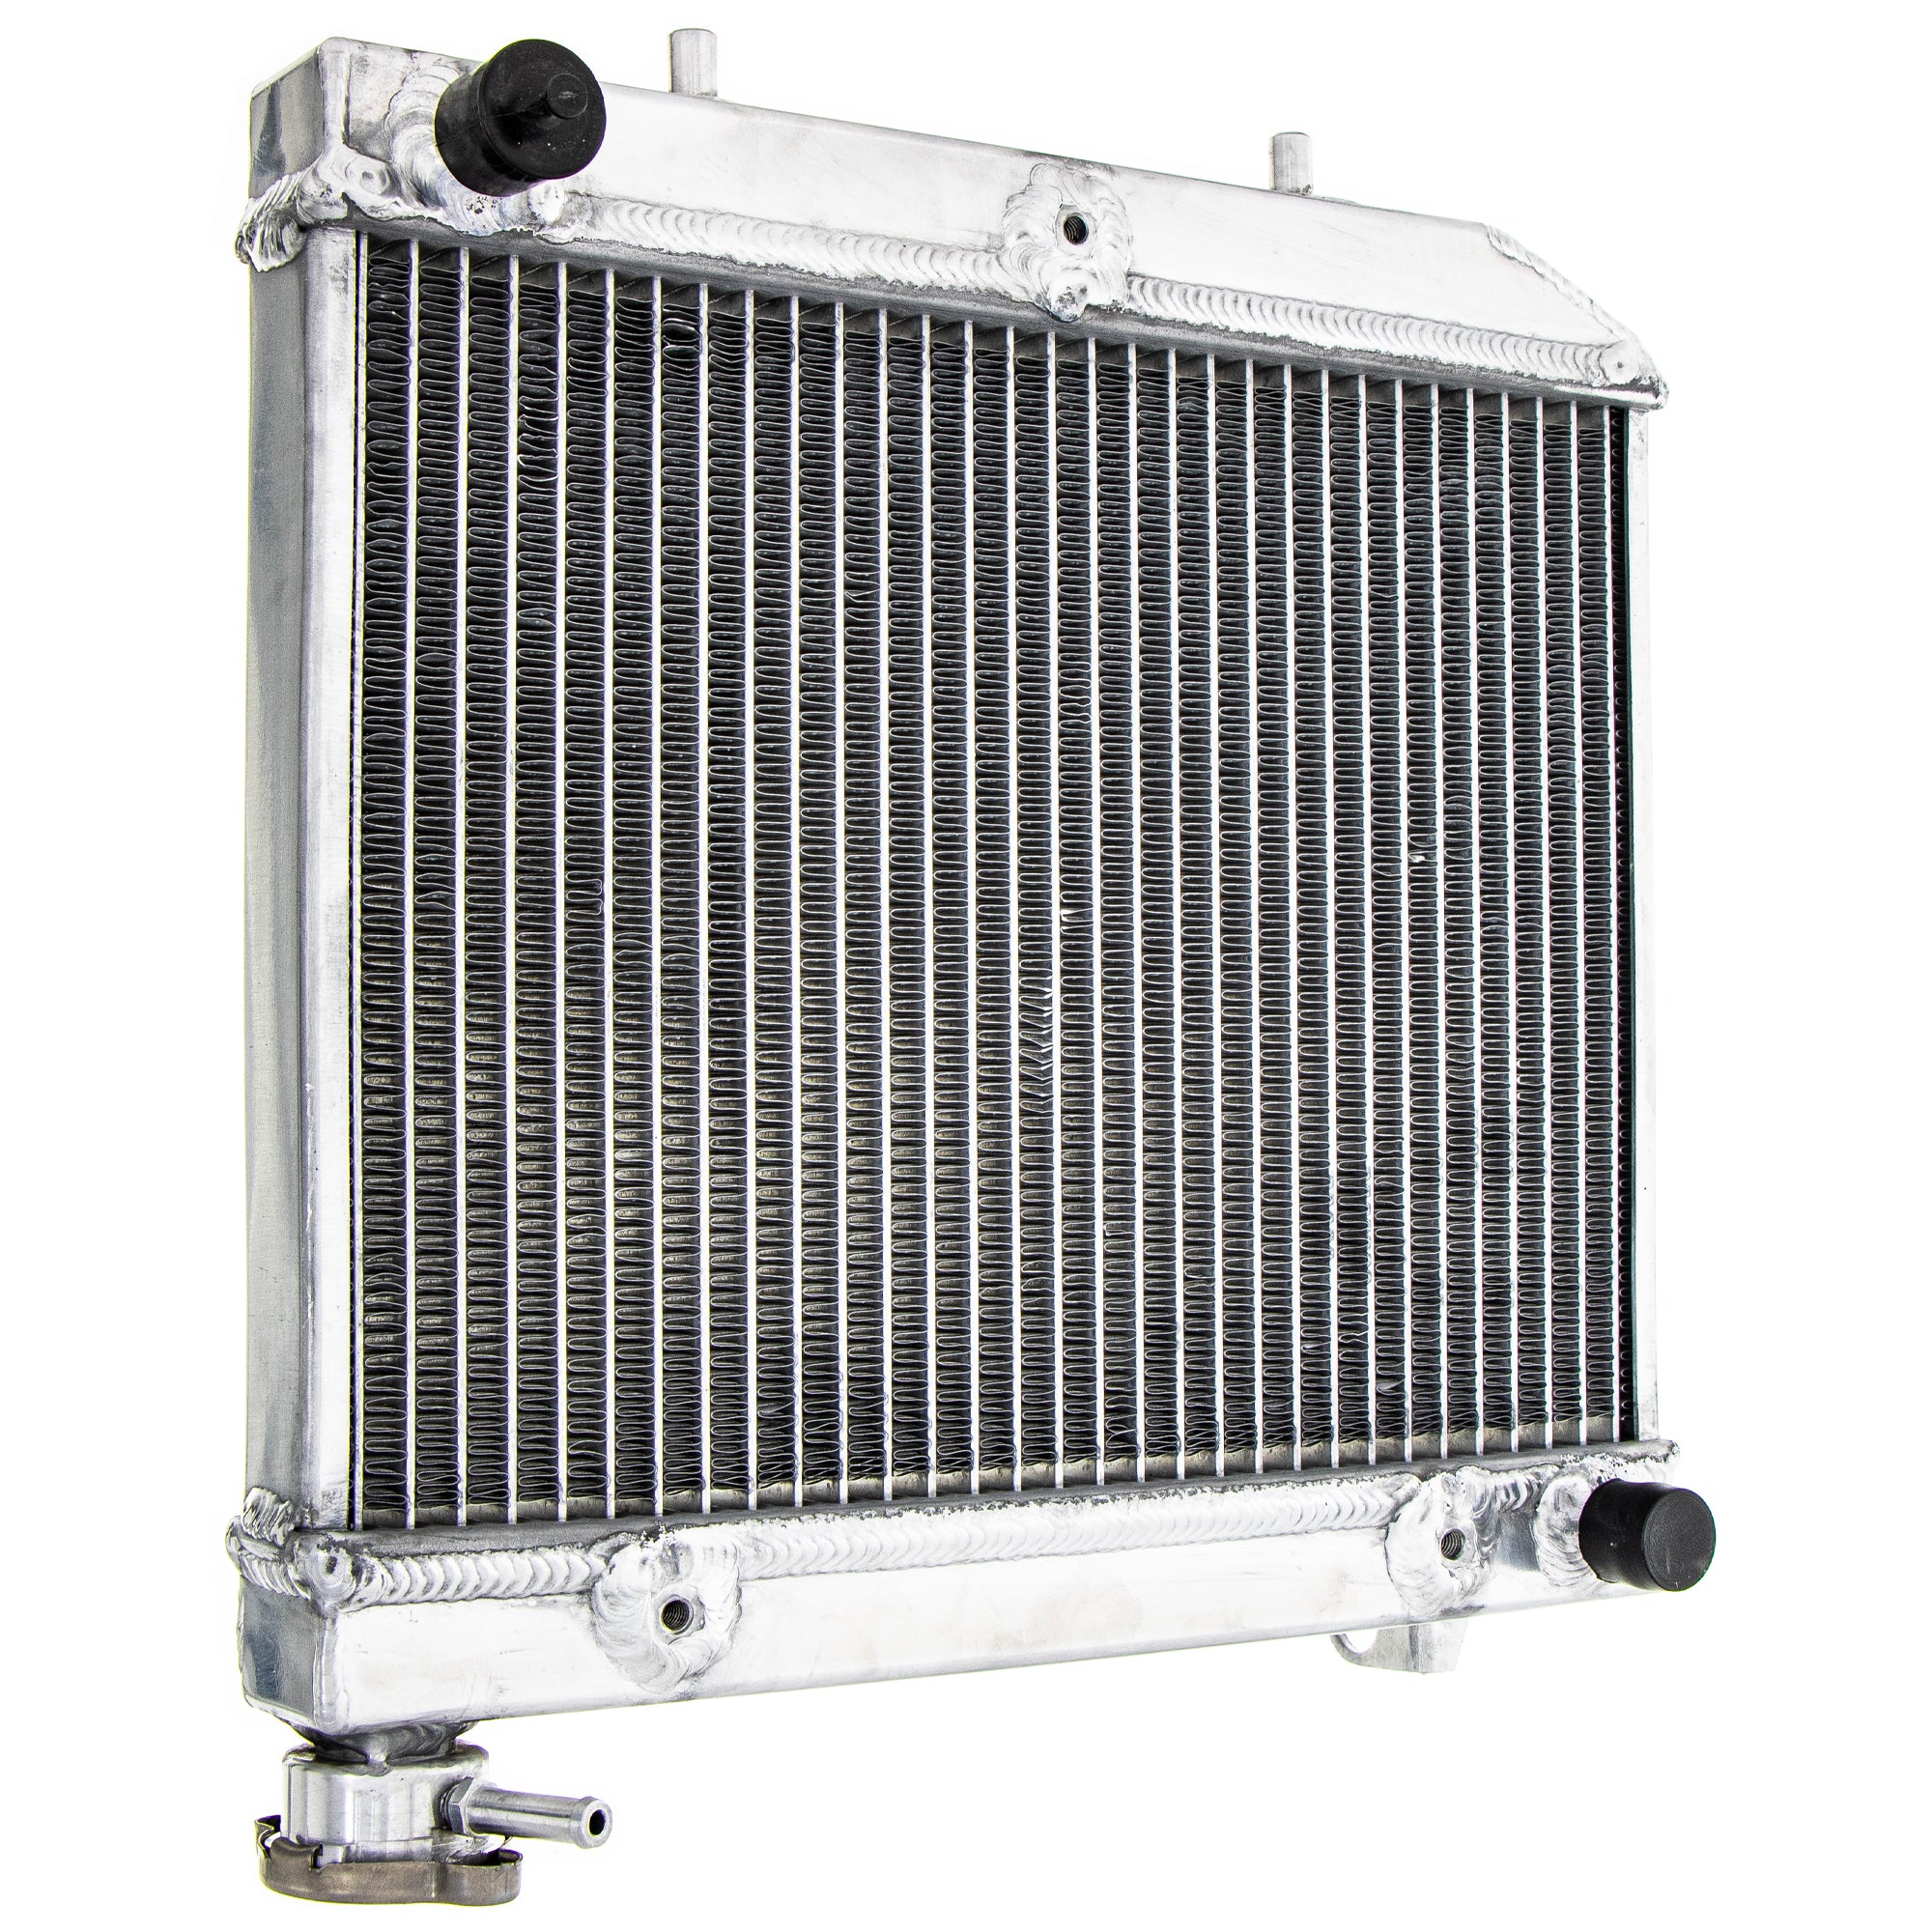 High Capacity Radiator for zOTHER TRX450 NICHE 519-CRD2230A